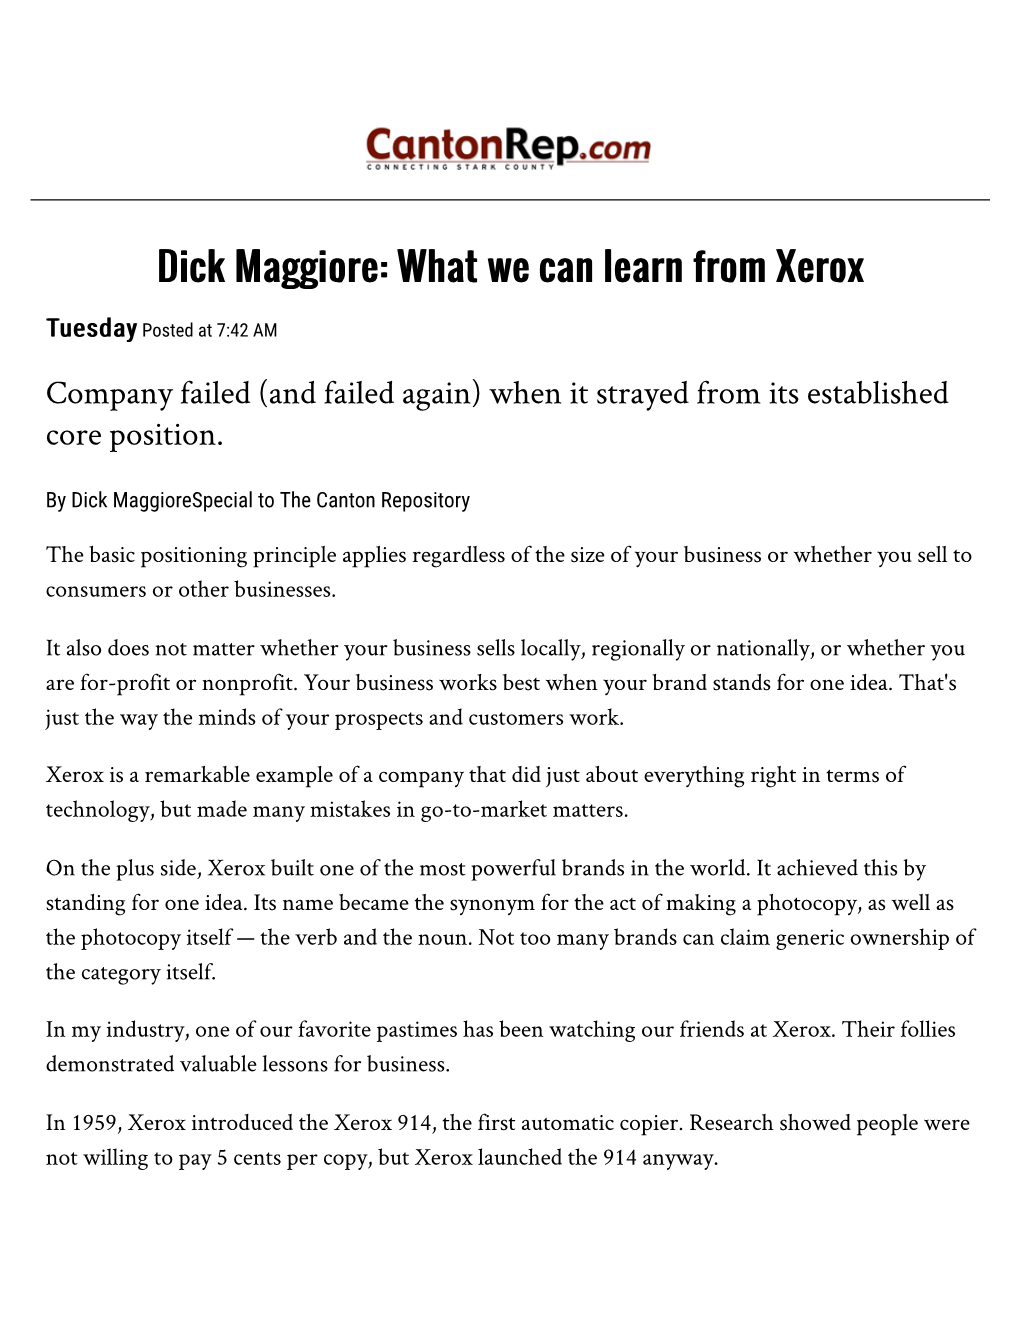 Dick Maggiore: What We Can Learn from Xerox